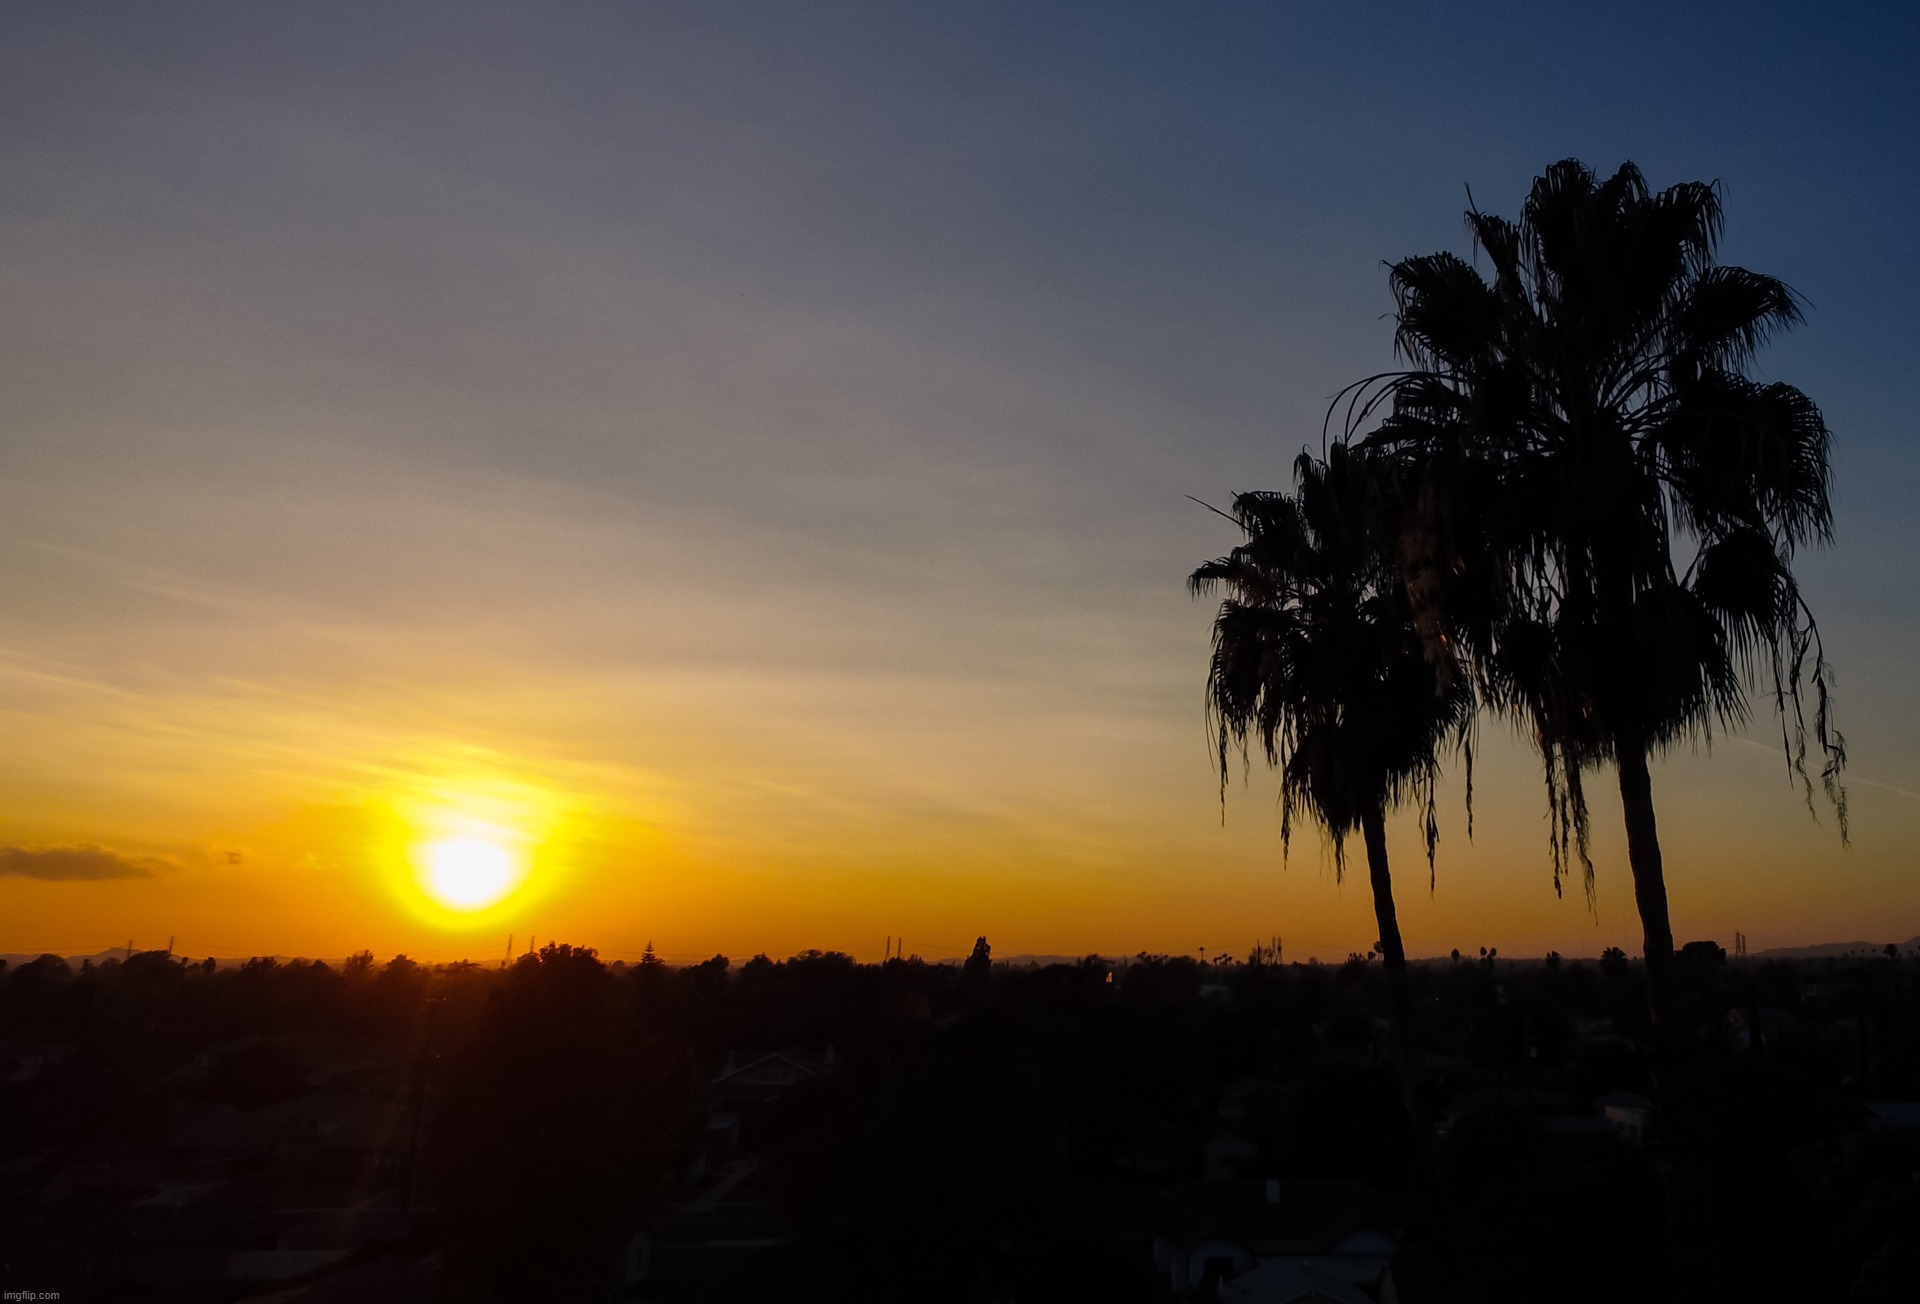 Sunset by palms. Drone photo. | image tagged in original photography,drone,sunset,palm trees,egos | made w/ Imgflip meme maker